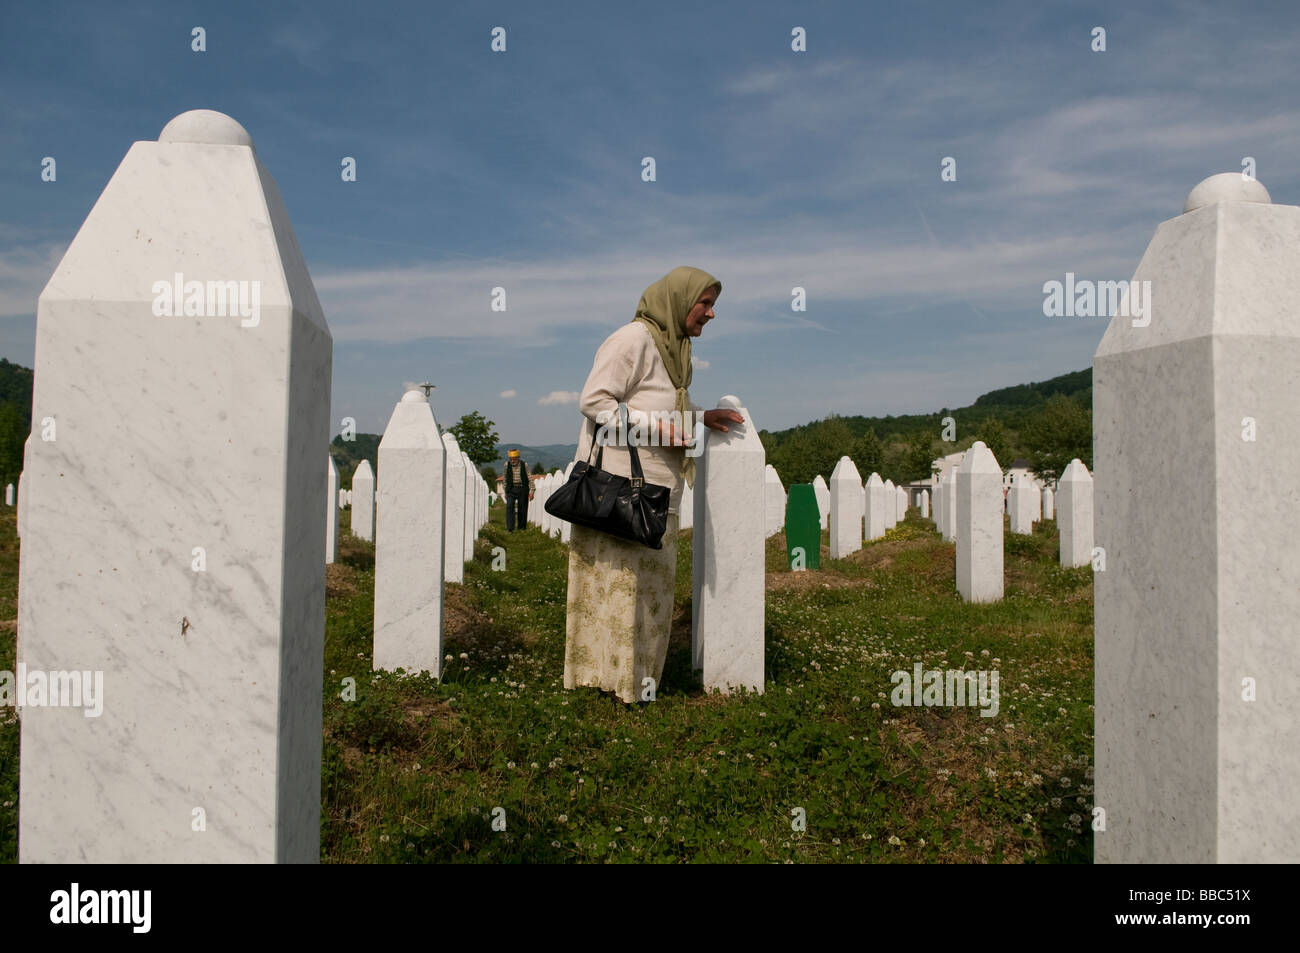 A Bosnian Muslim woman walks between graves of her relatives, victims of the Srebrenica genocide, at the cemetery in Potocari near Srebrenica, Bosnia Stock Photo